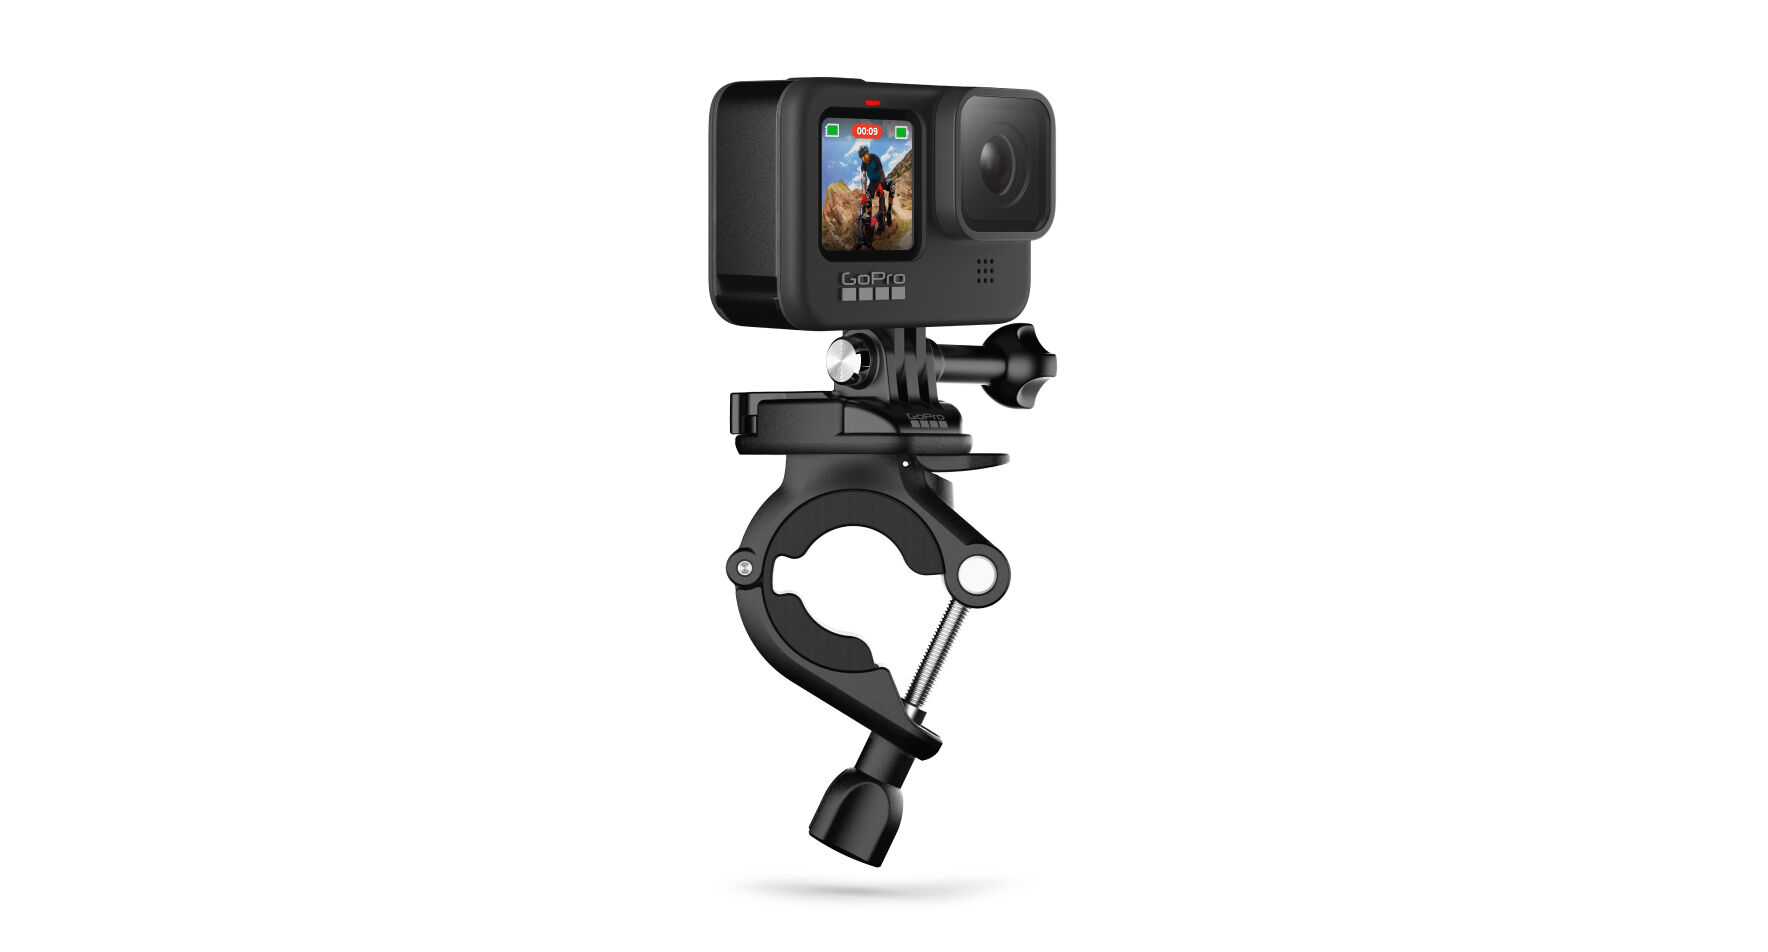 Picture of GoPro Sports Kit